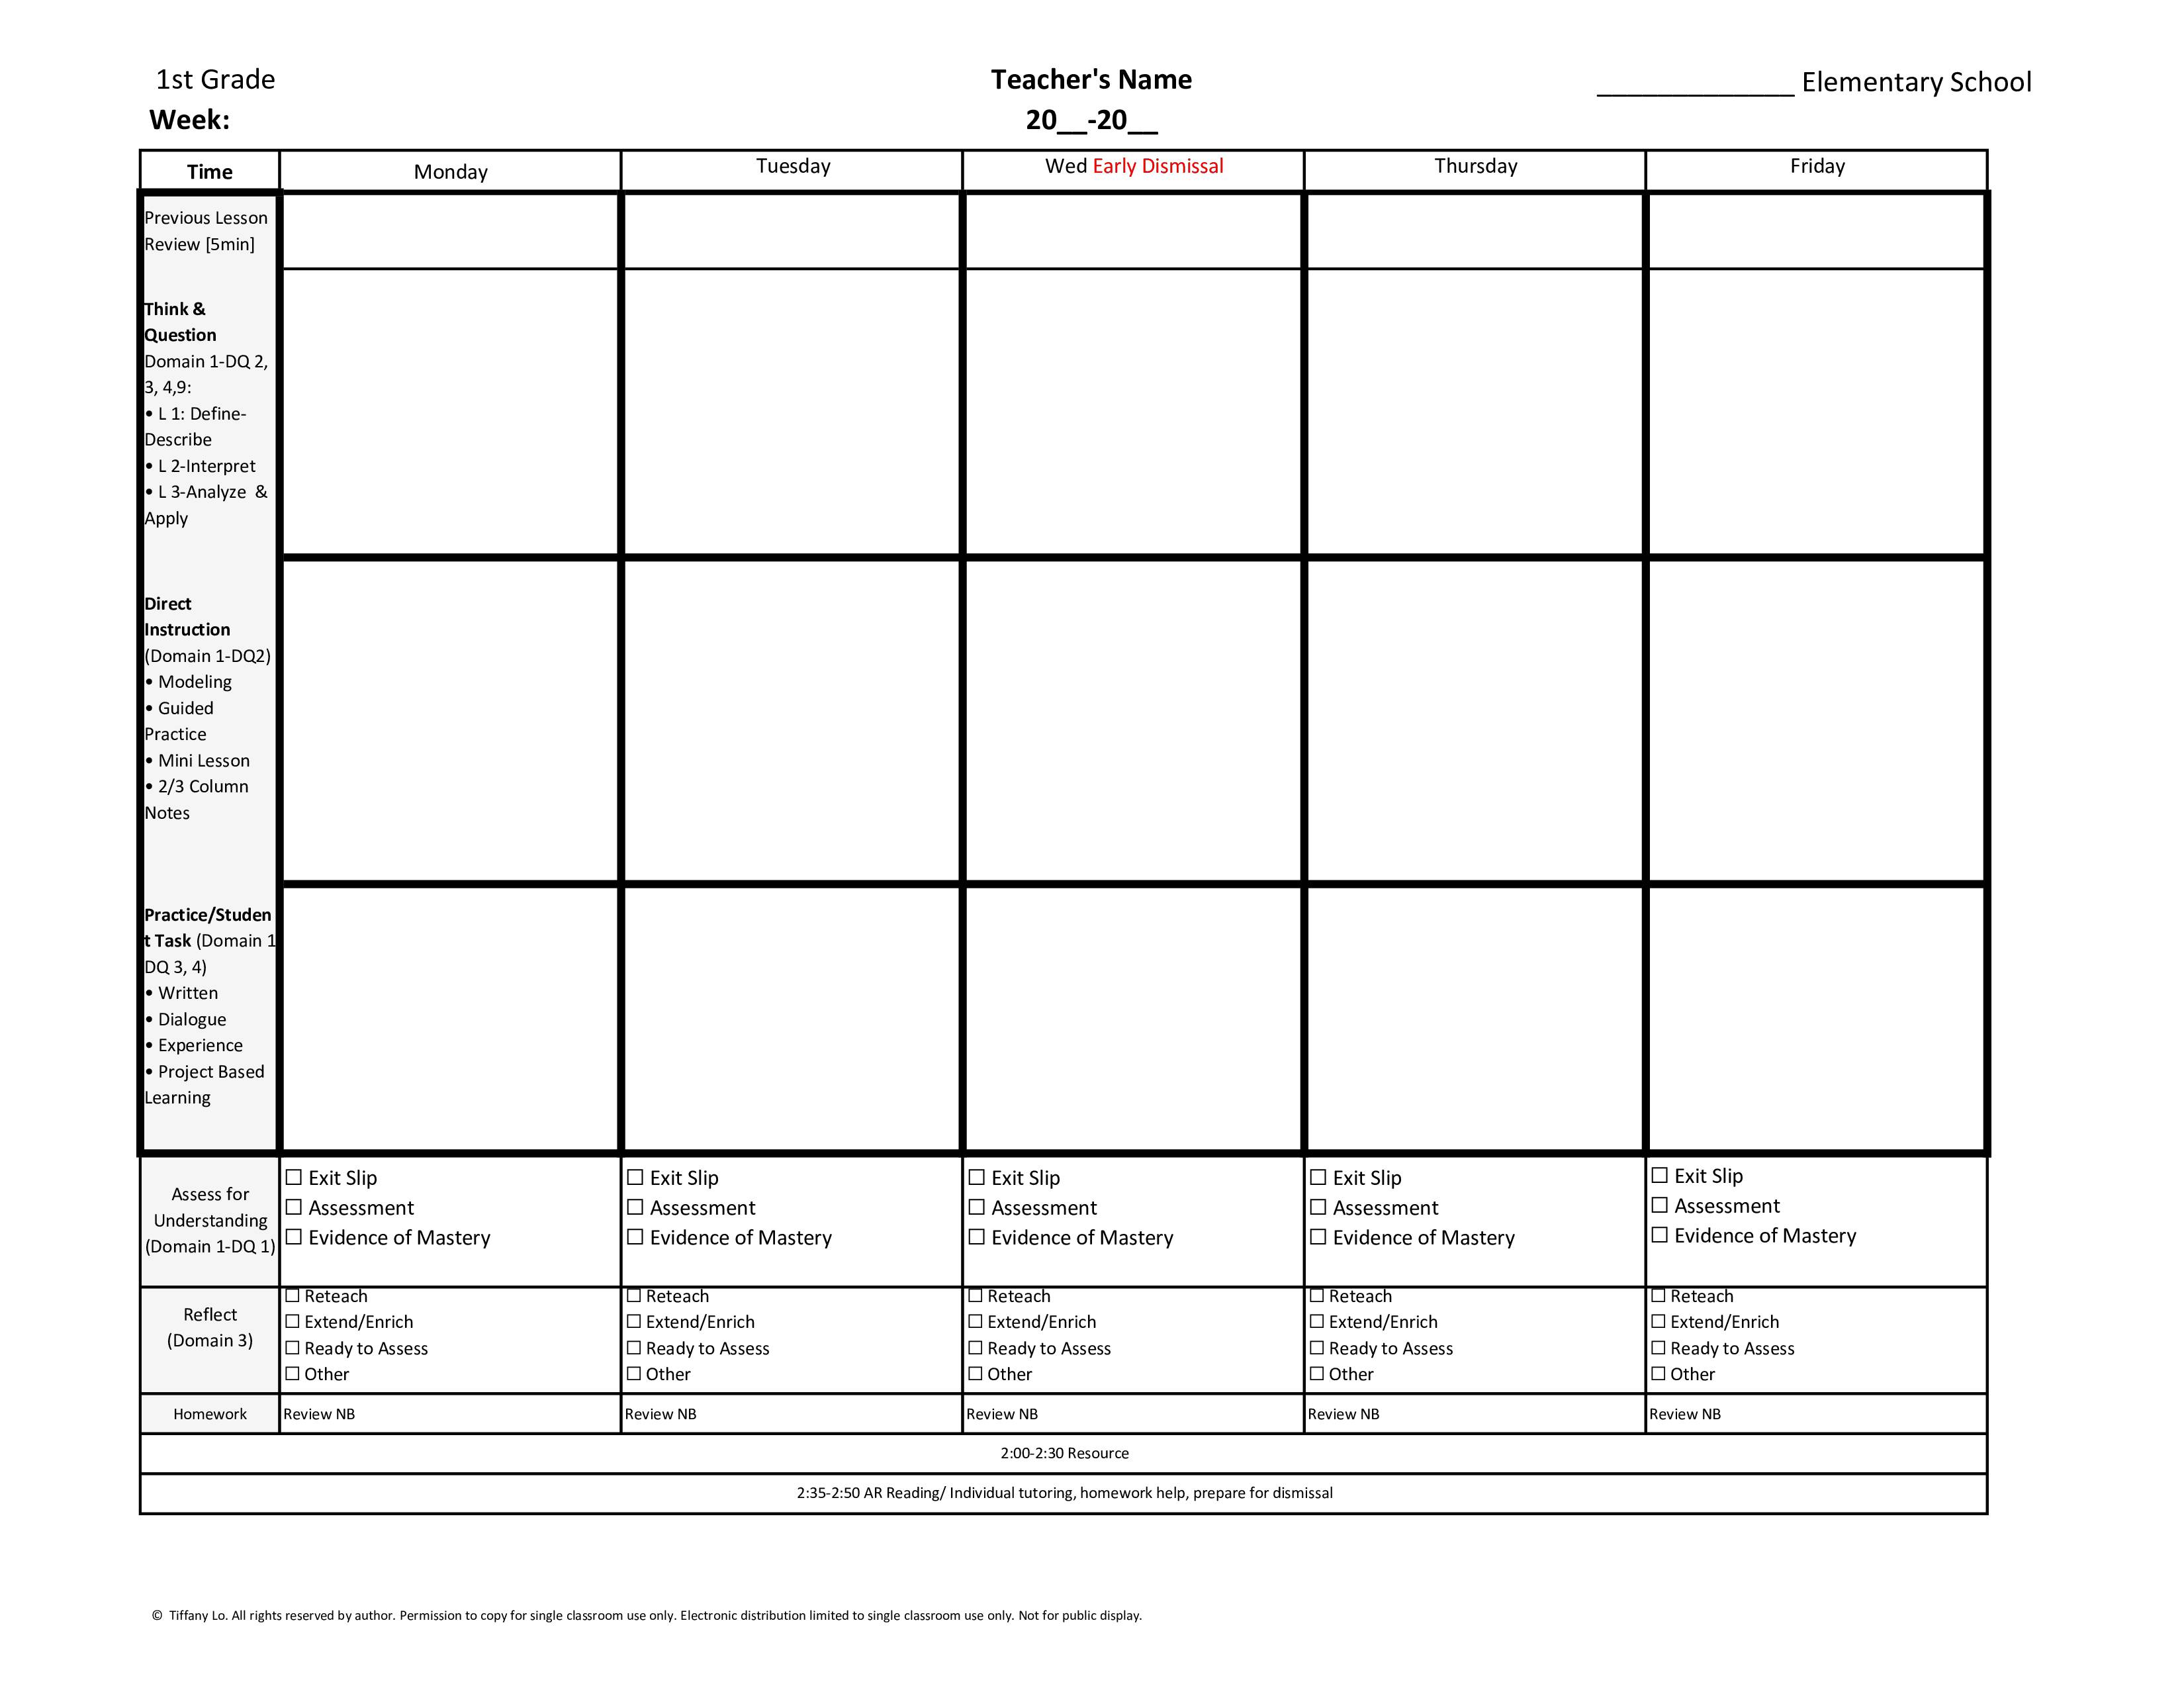 1st-first-grade-common-core-weekly-lesson-plan-template-w-drop-down